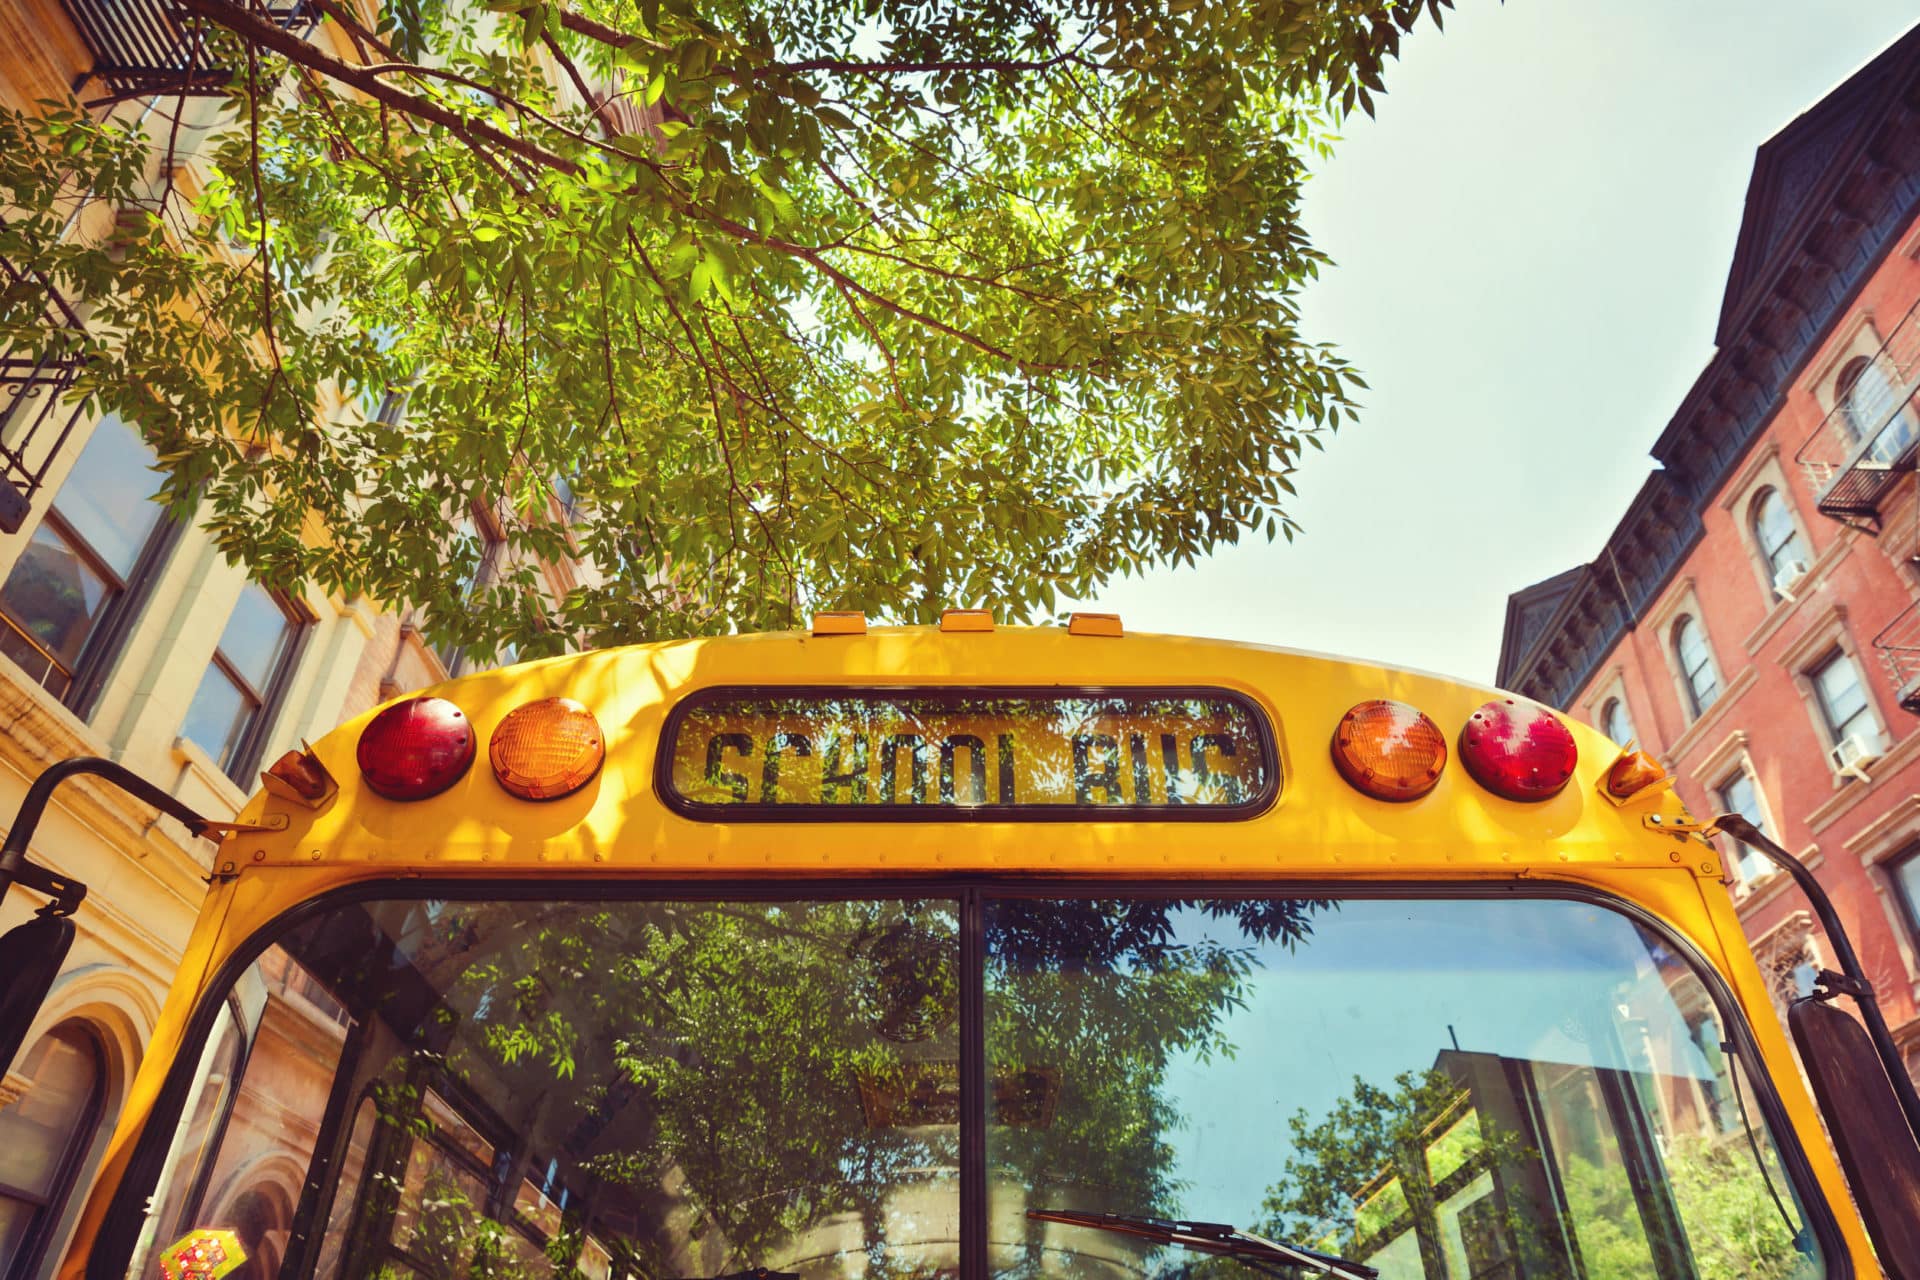 Should NY Parents Worry about Their Kids Riding the School Bus?